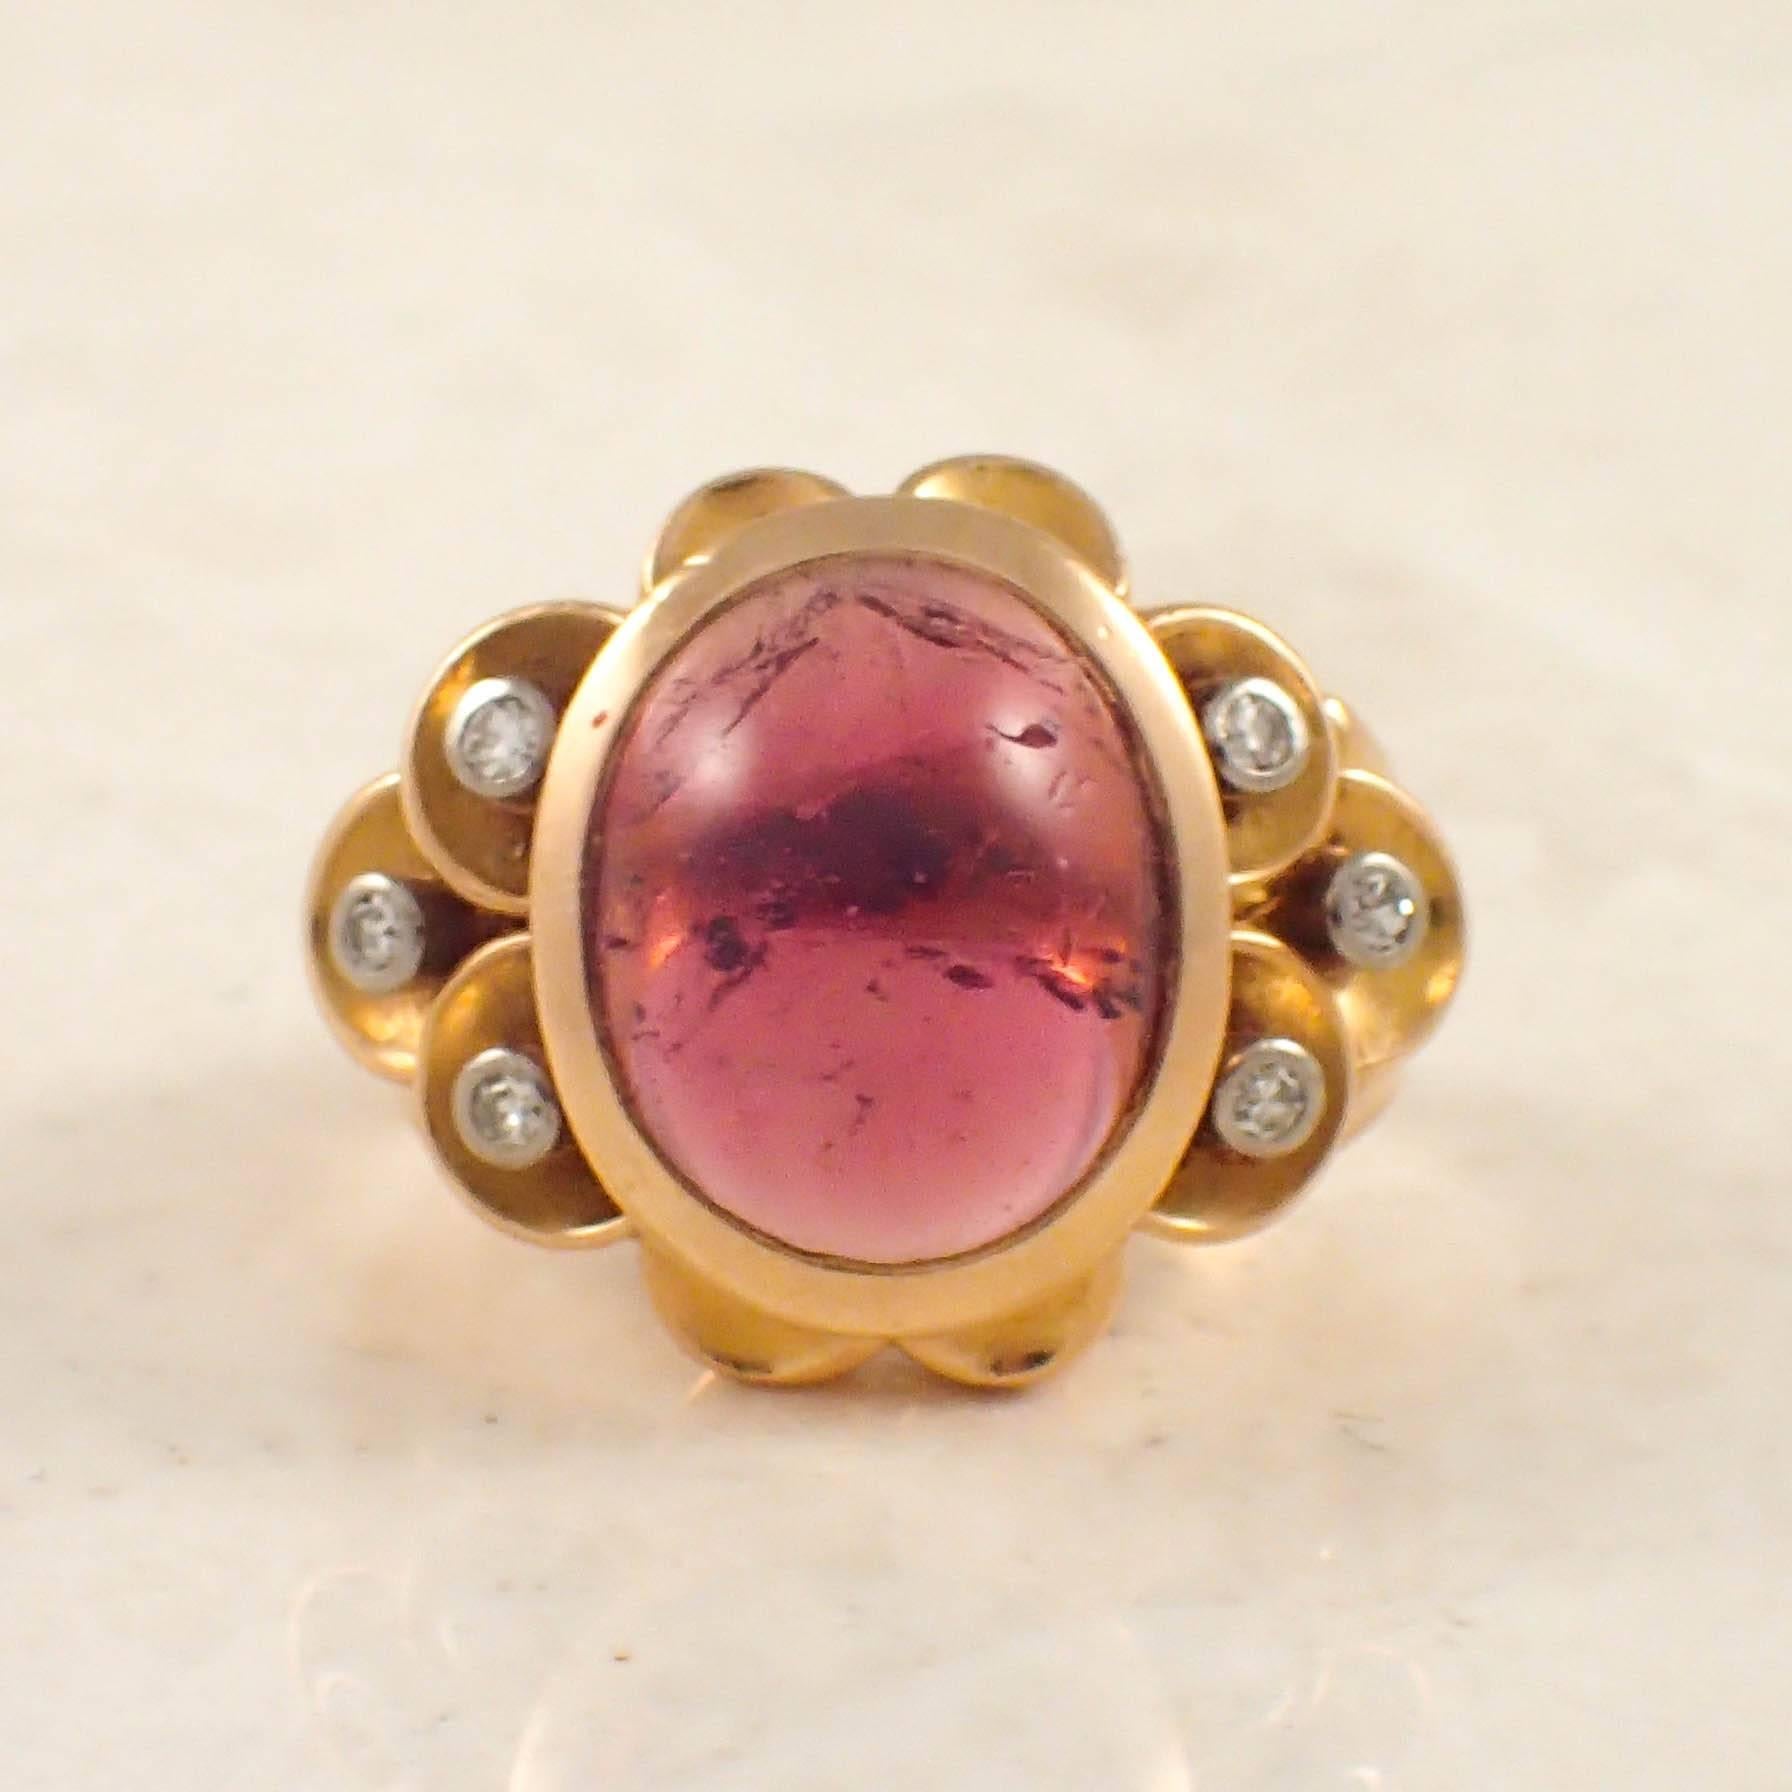 Retro 18k rose gold tourmaline and diamond ring. The retro ring is set with one oval shape cabochon cut pink tourmaline measuring 13 X 11 mm and six small single cut diamonds. Circa 1940s.